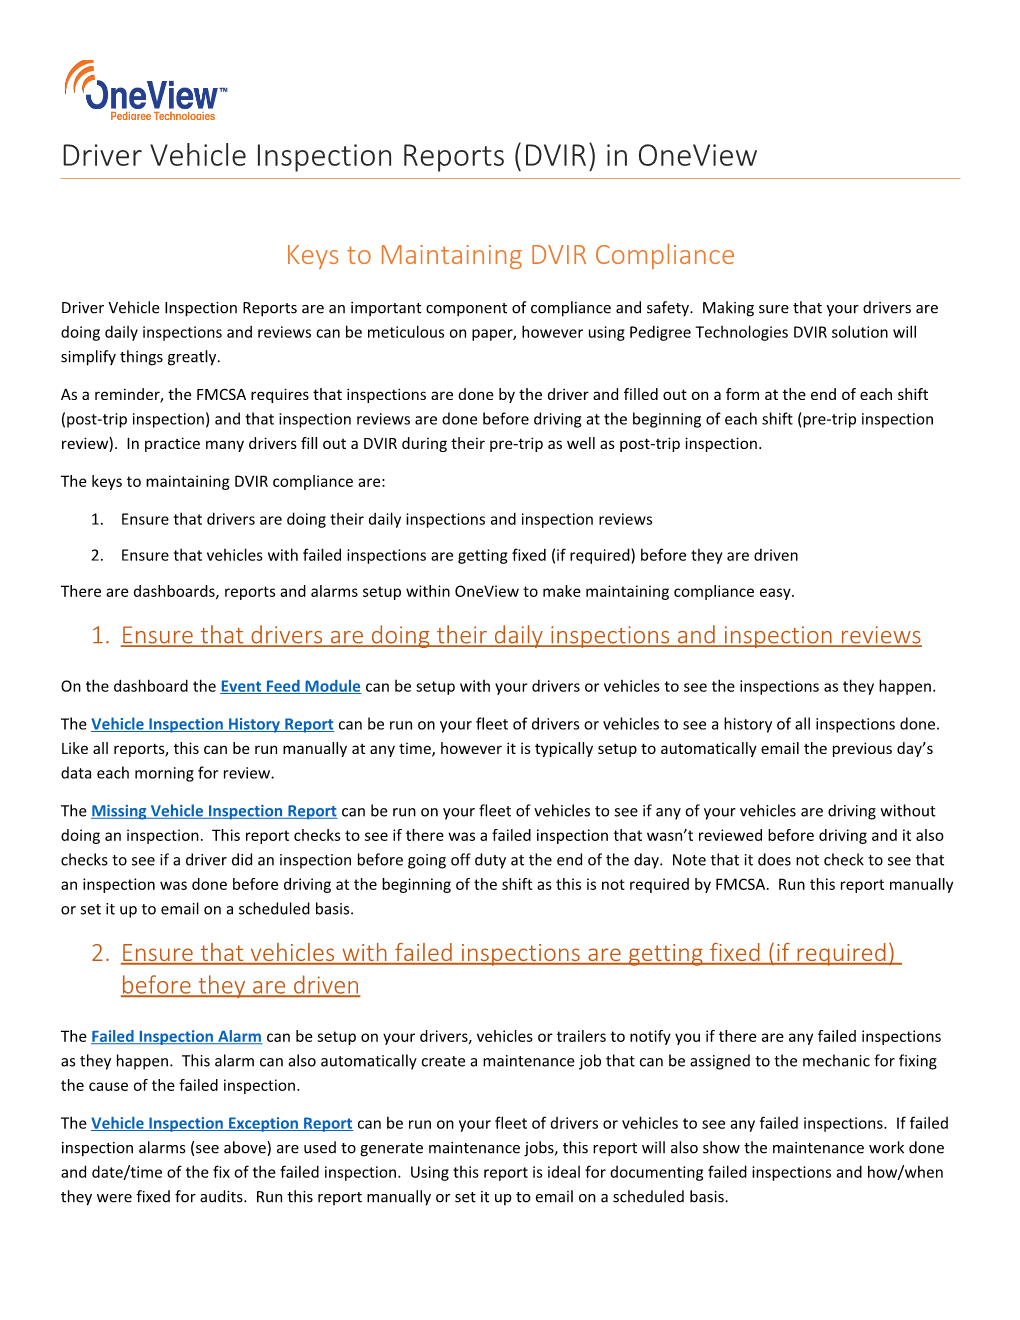 Driver Vehicle Inspection Reports (DVIR) in Oneview